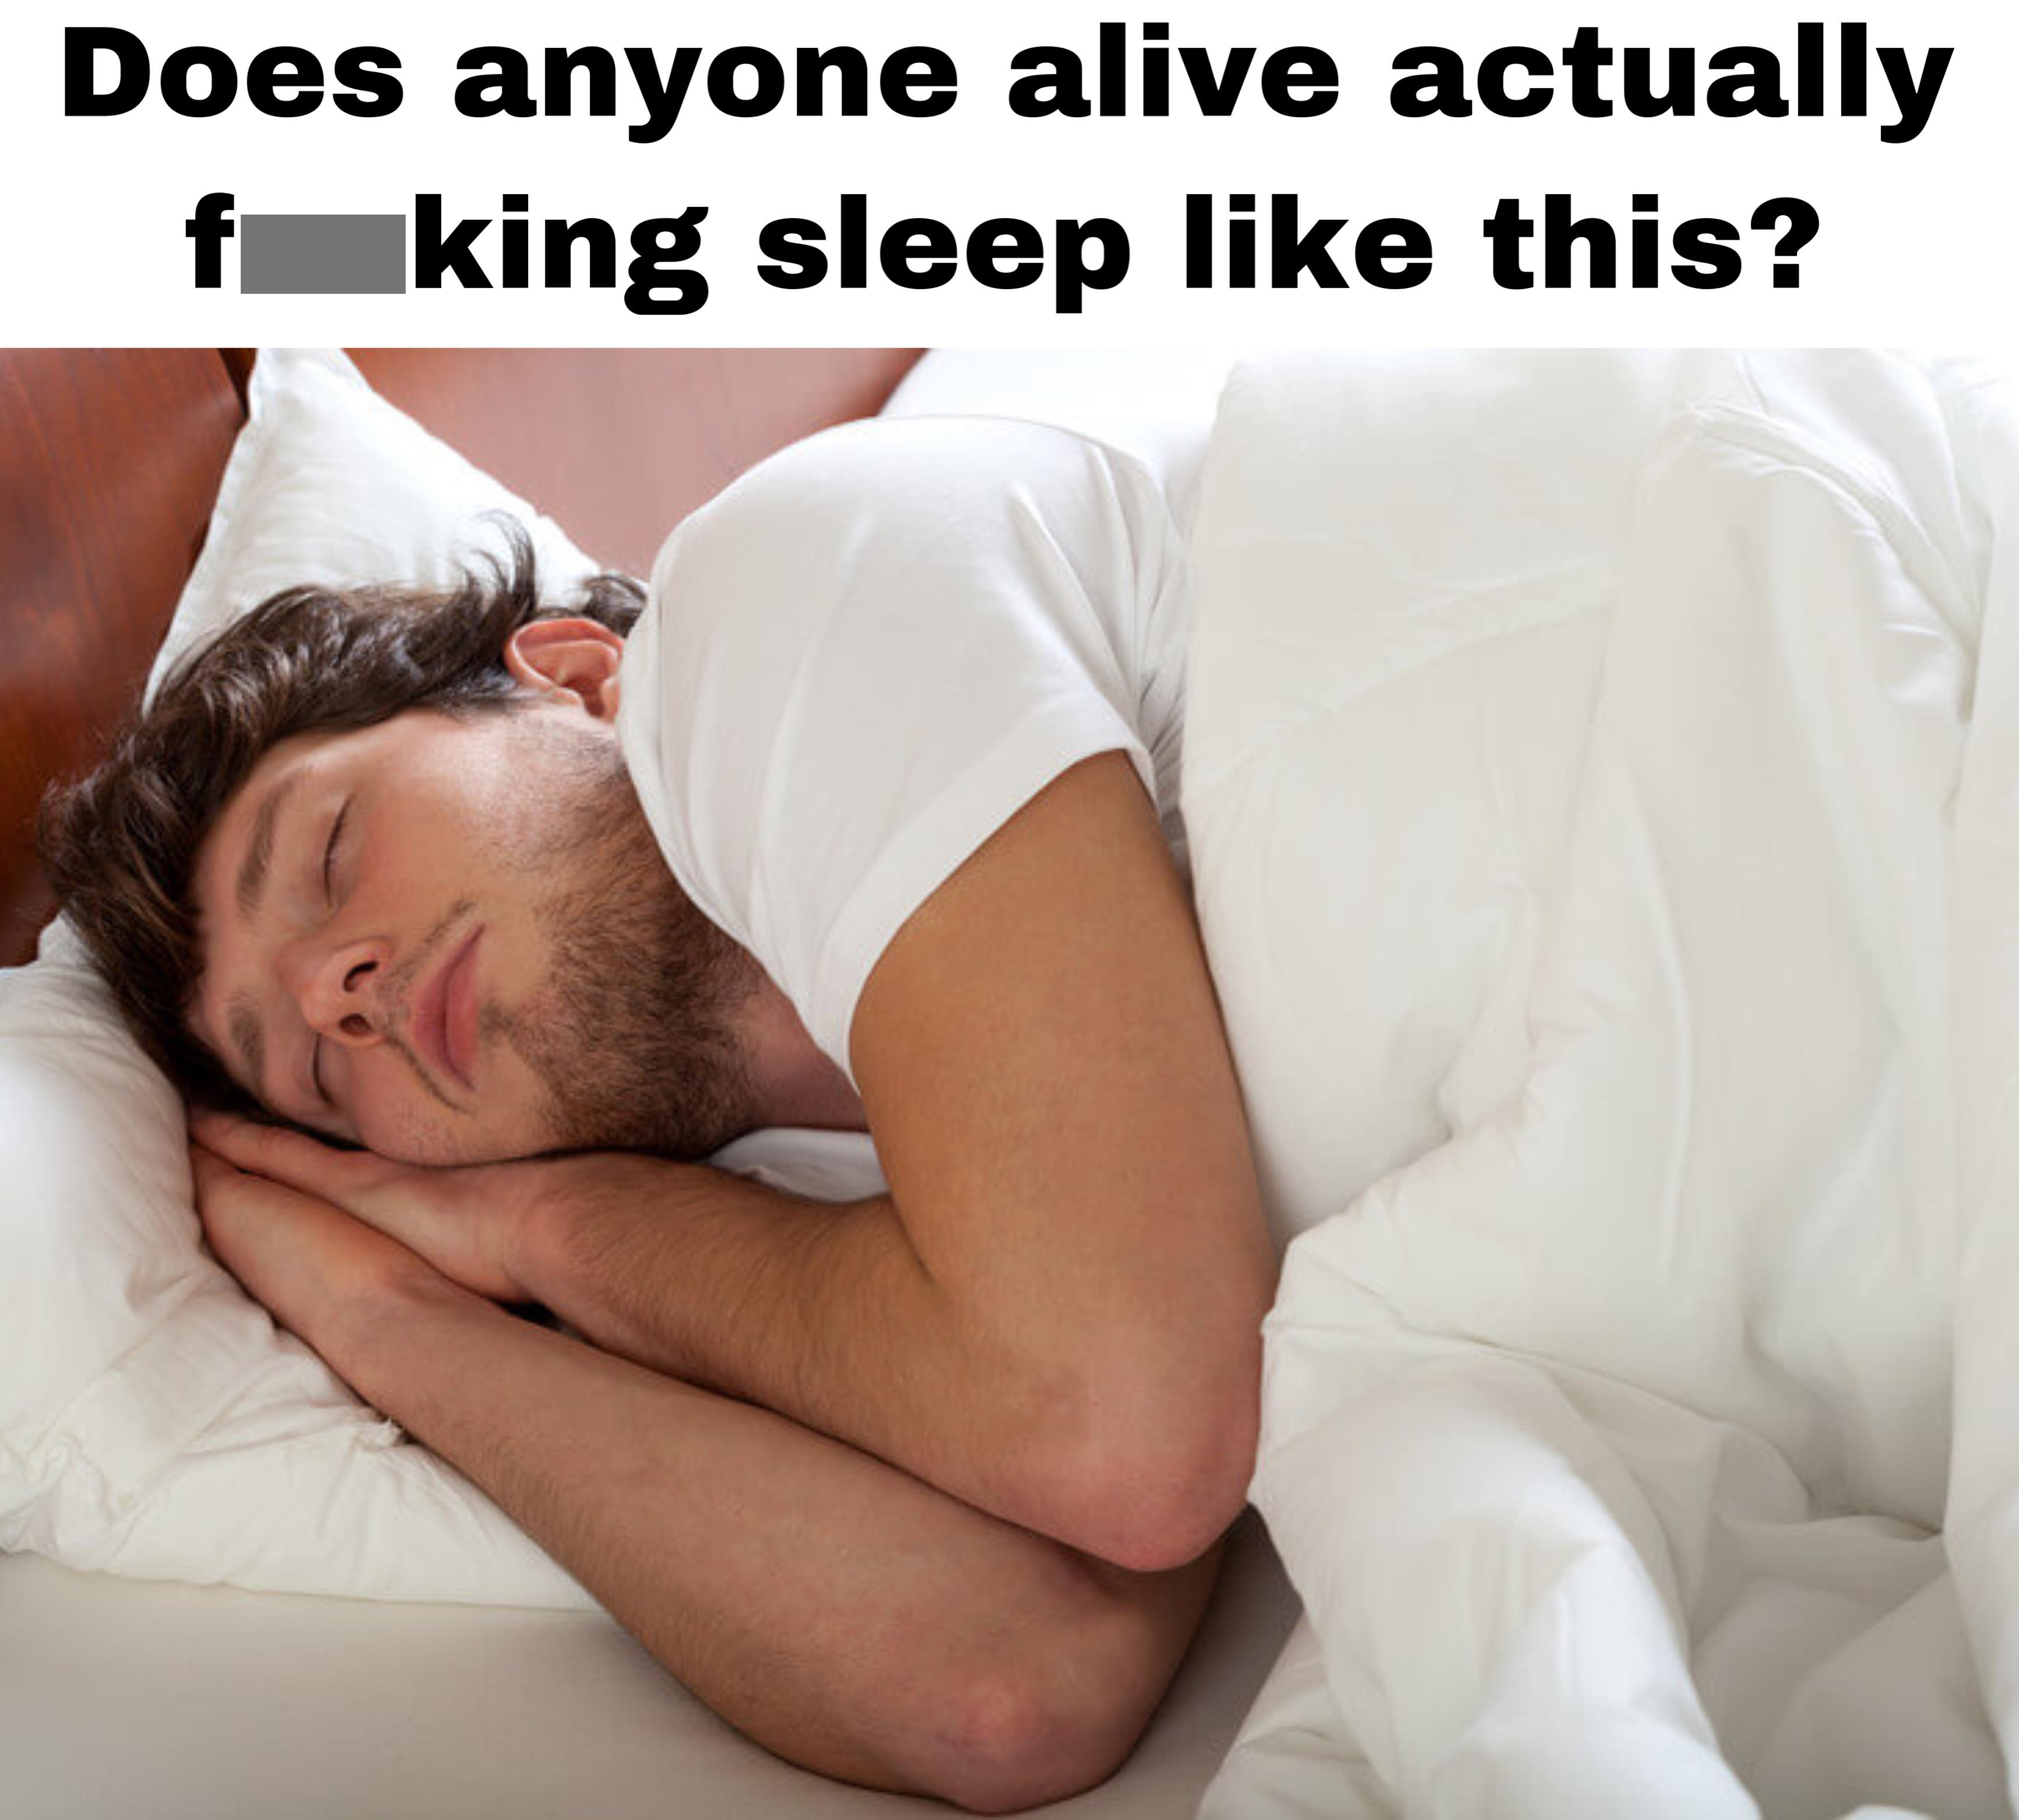 sleeping like a baby - Does anyone alive actually f king sleep this?